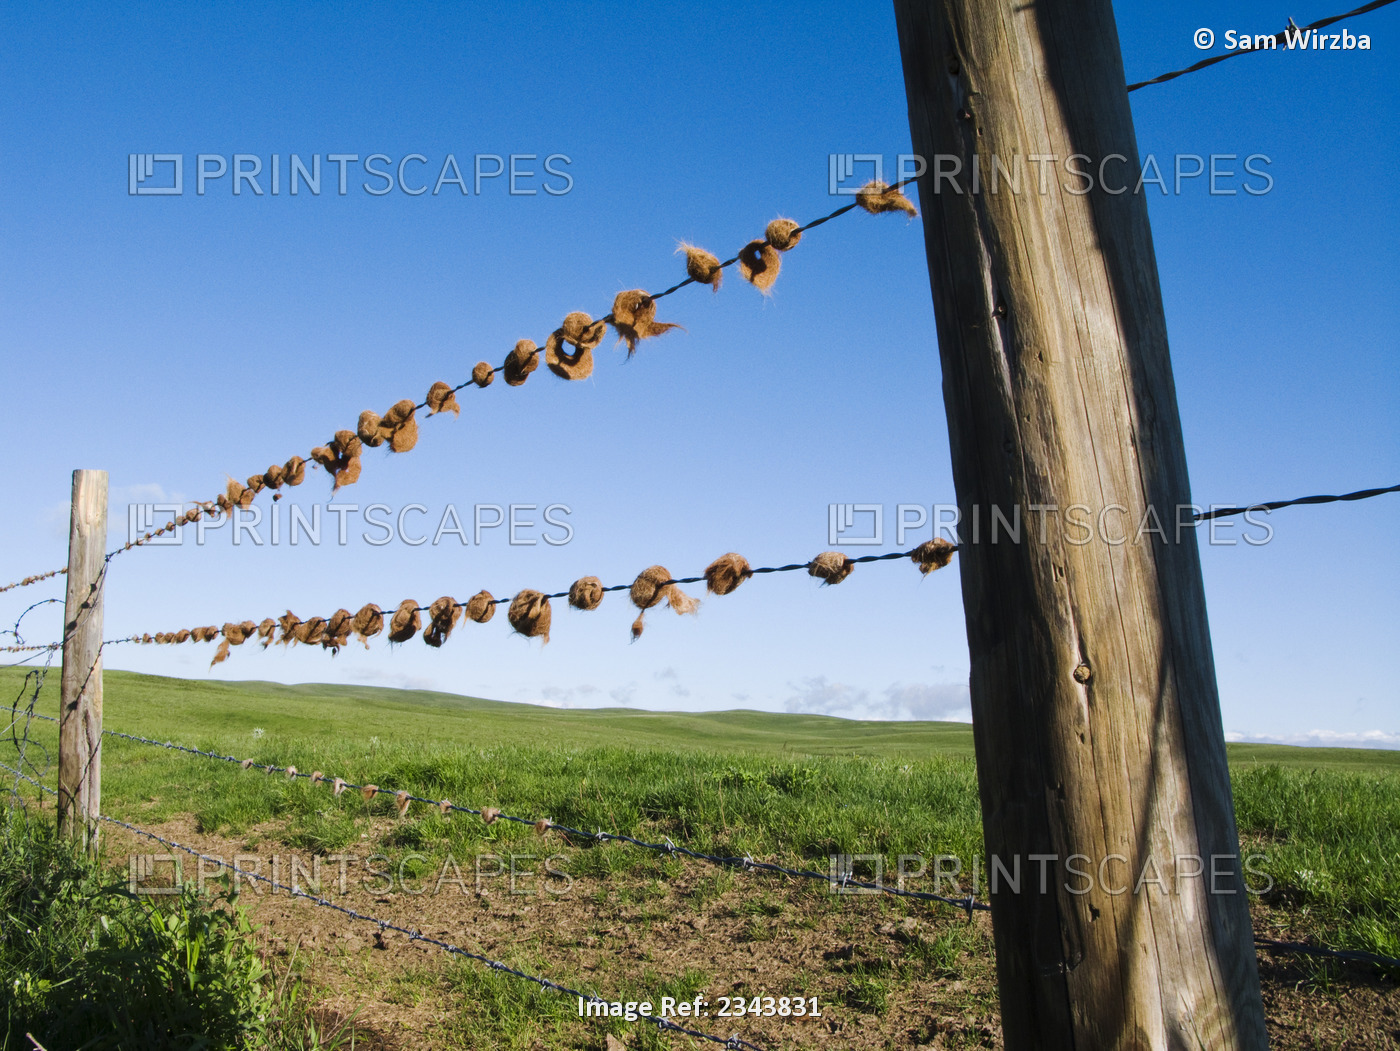 Agriculture - Ranch fence containing tufts of cattle hair on barbed wire ...